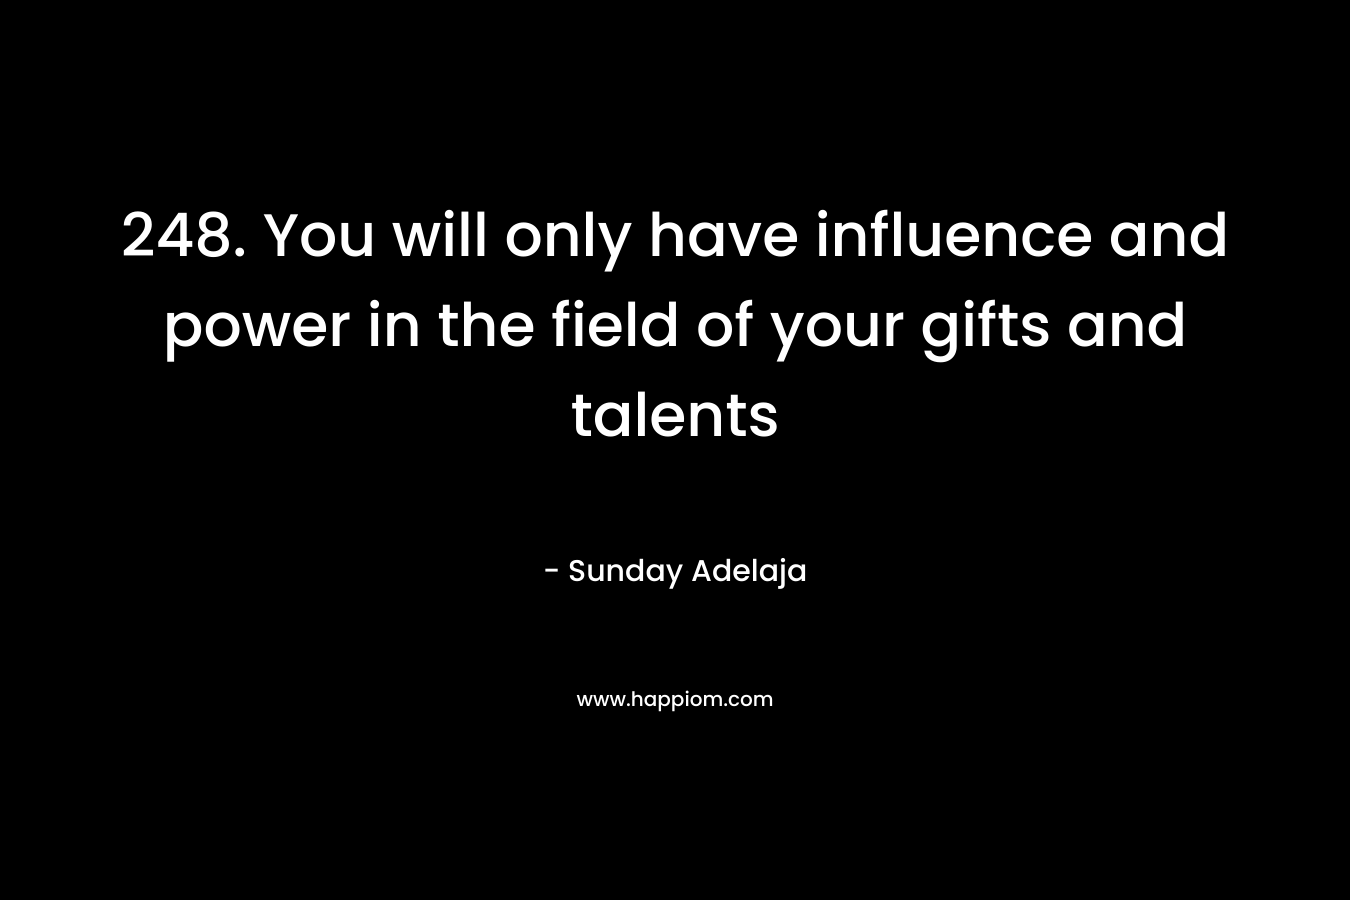 248. You will only have influence and power in the field of your gifts and talents